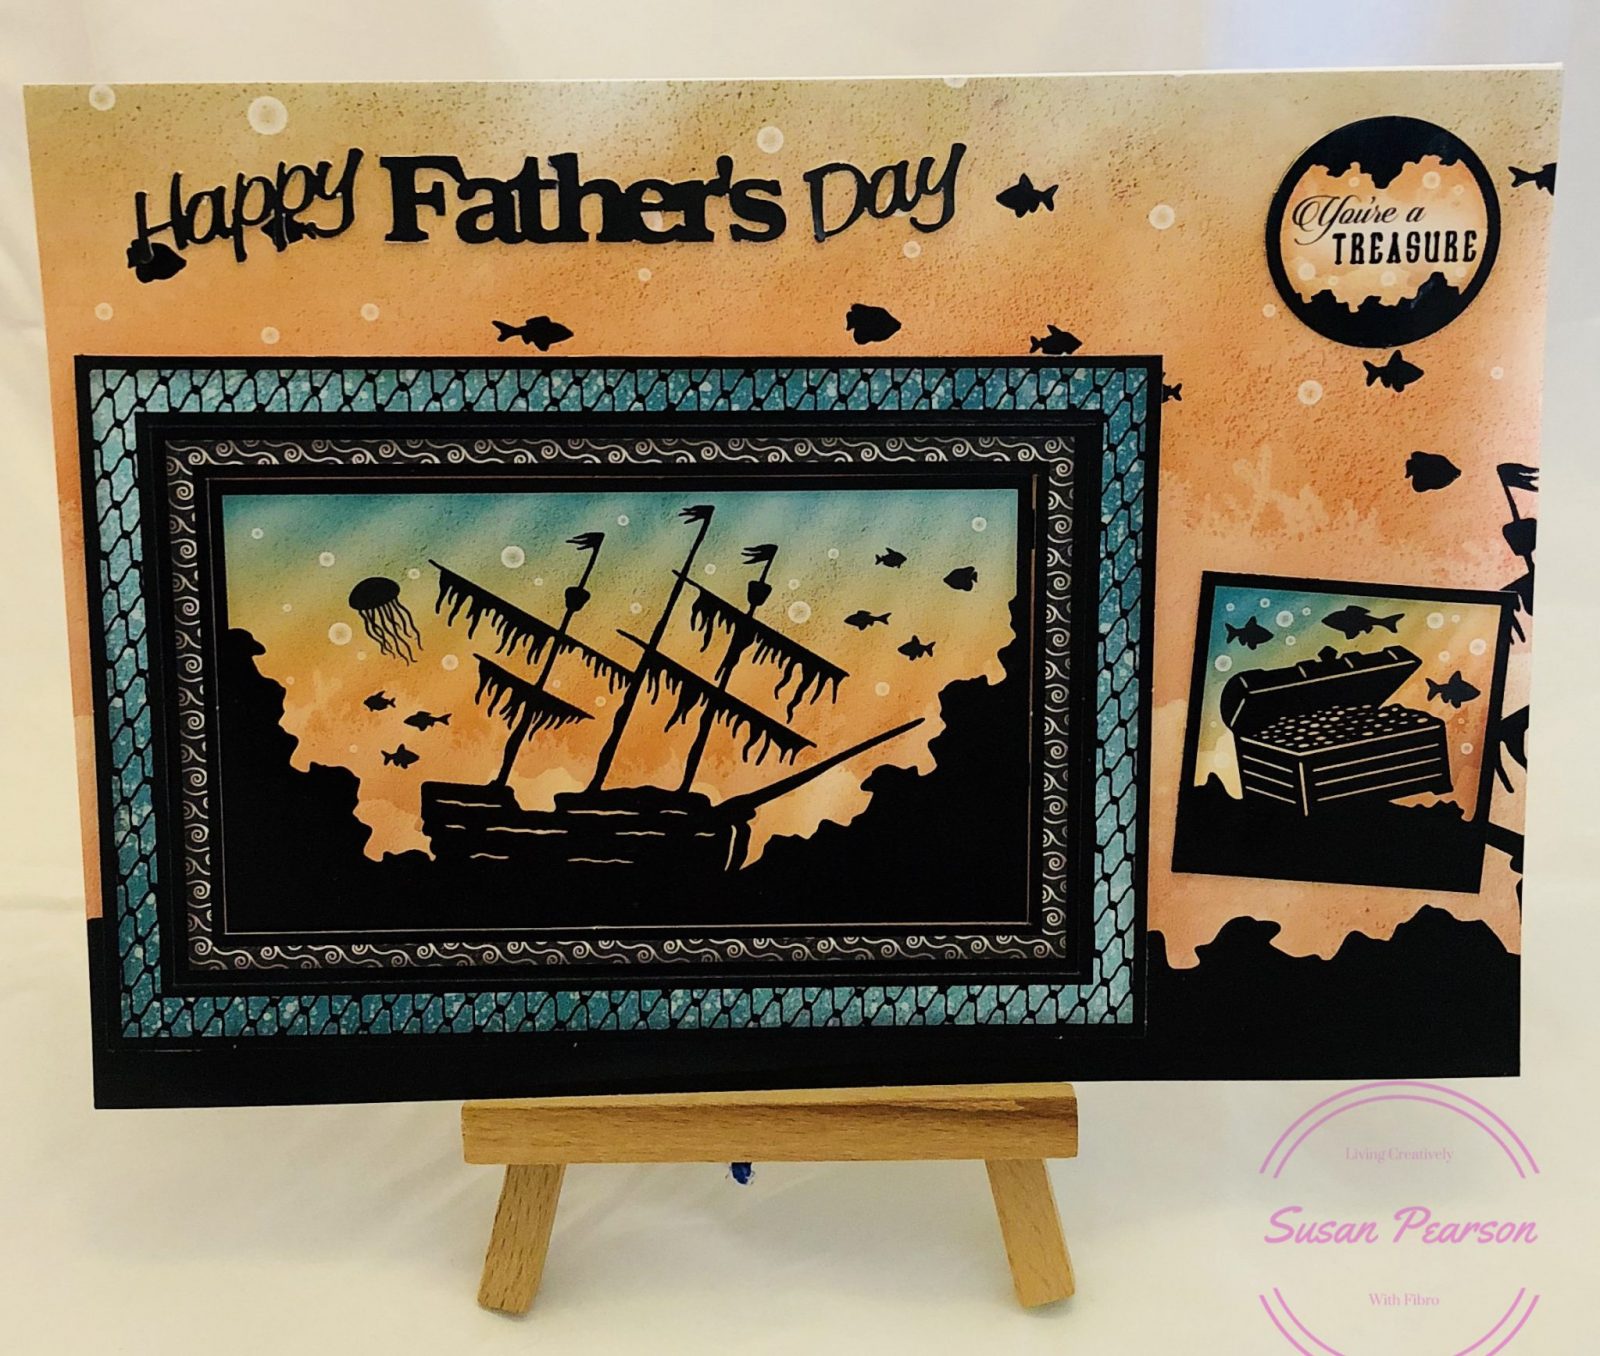 Living Creatively with Fibro | Father's Day 2018 card for Dad featuring a silhouette image of of a sunken ship surrounded by fish in orange and aqua shades